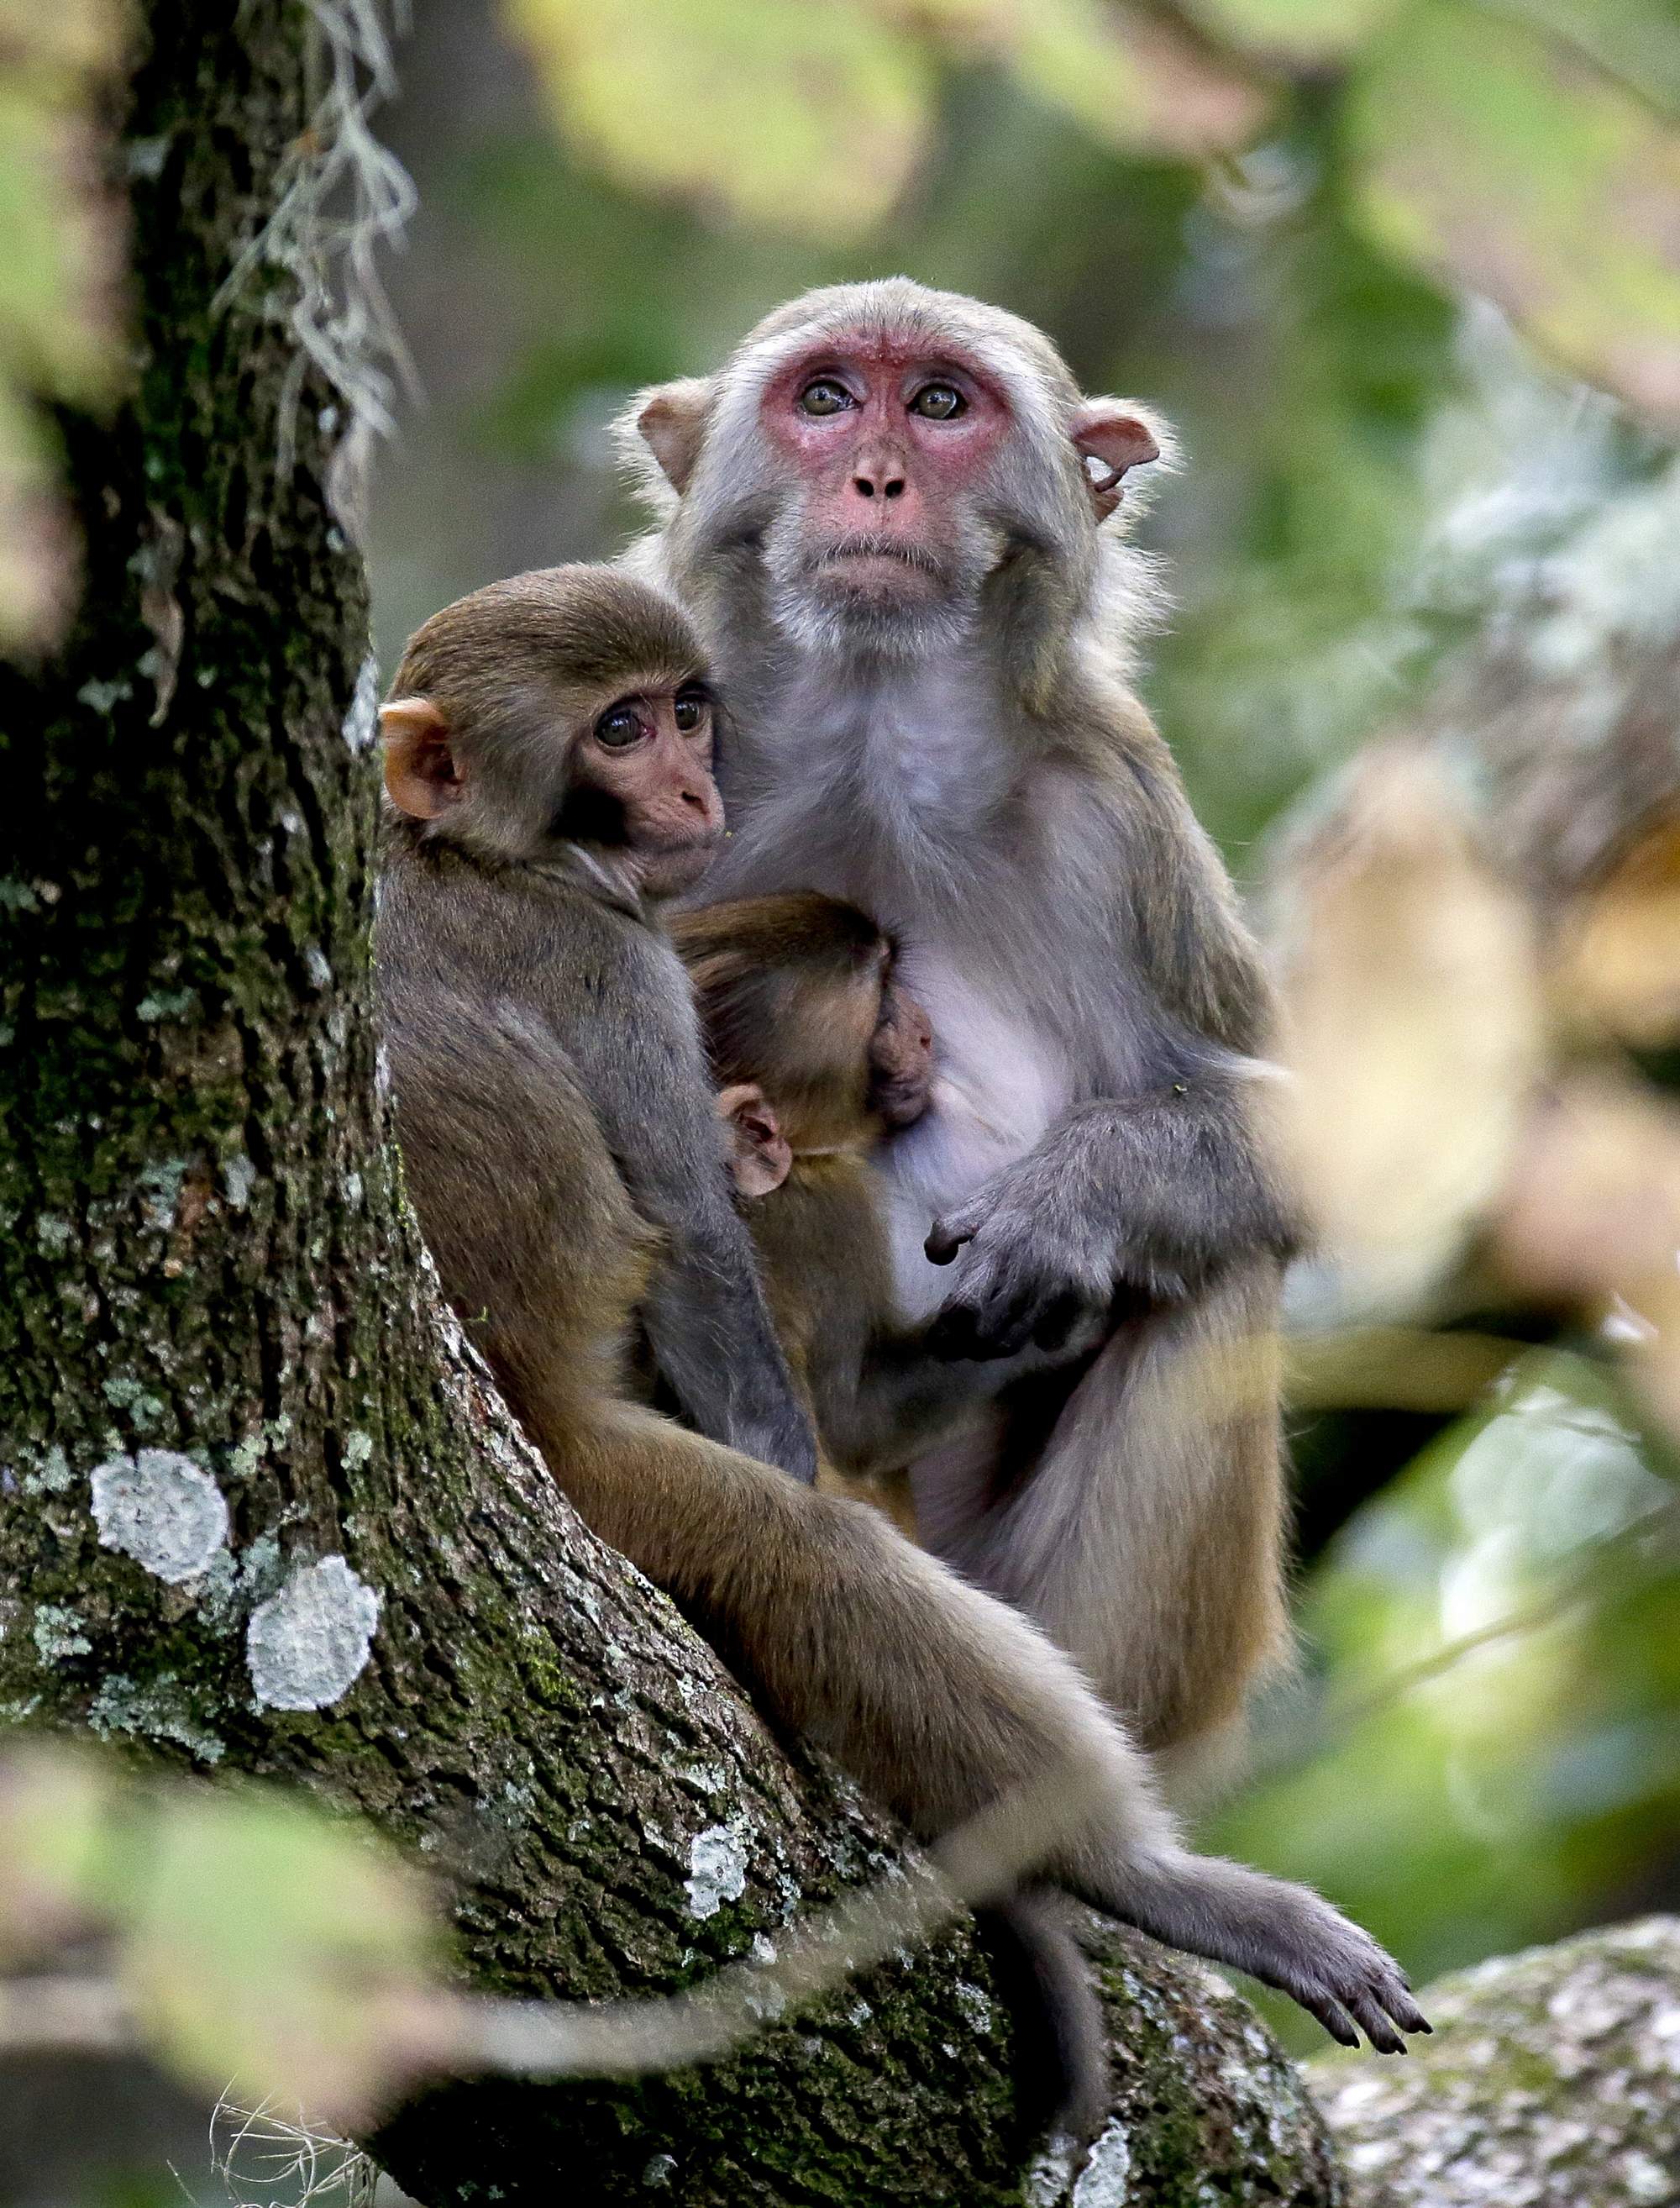 Florida's wild monkeys carry herpes virus, a concern to humans | tbo.com